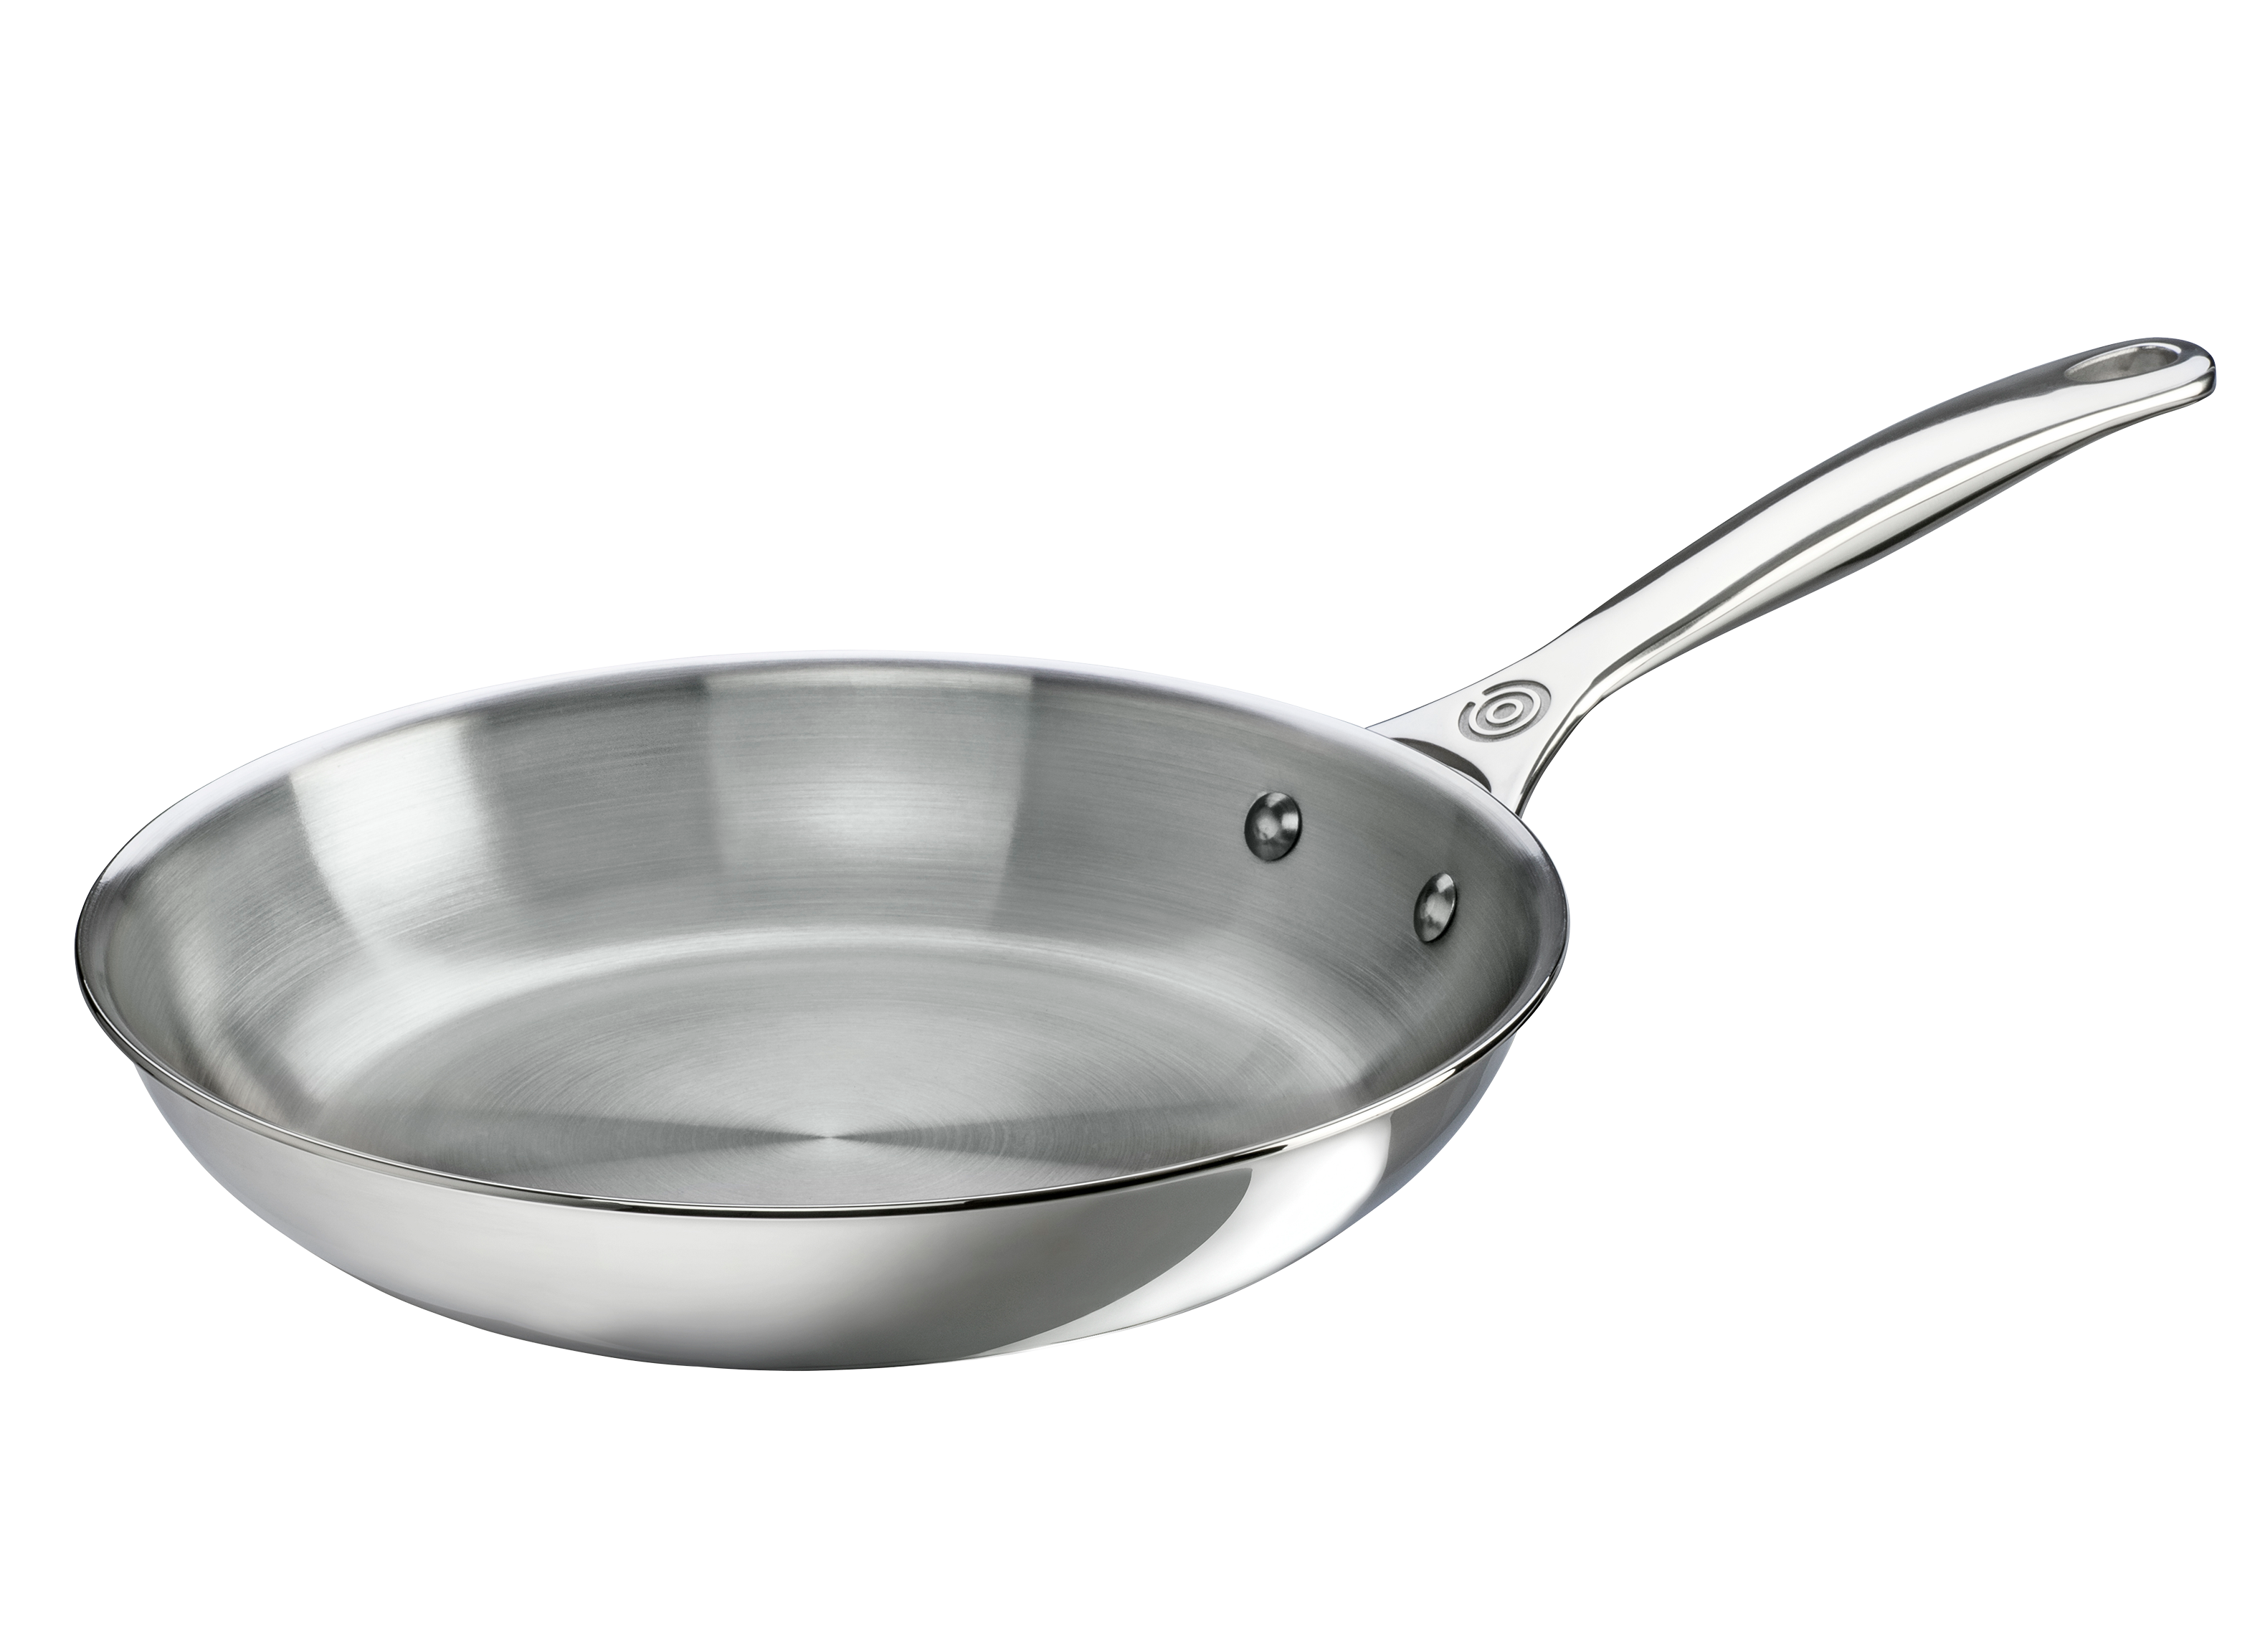 https://crdms.images.consumerreports.org/prod/products/cr/models/404679-frying-pans-stainless-steel-le-creuset-signature-10023932.png